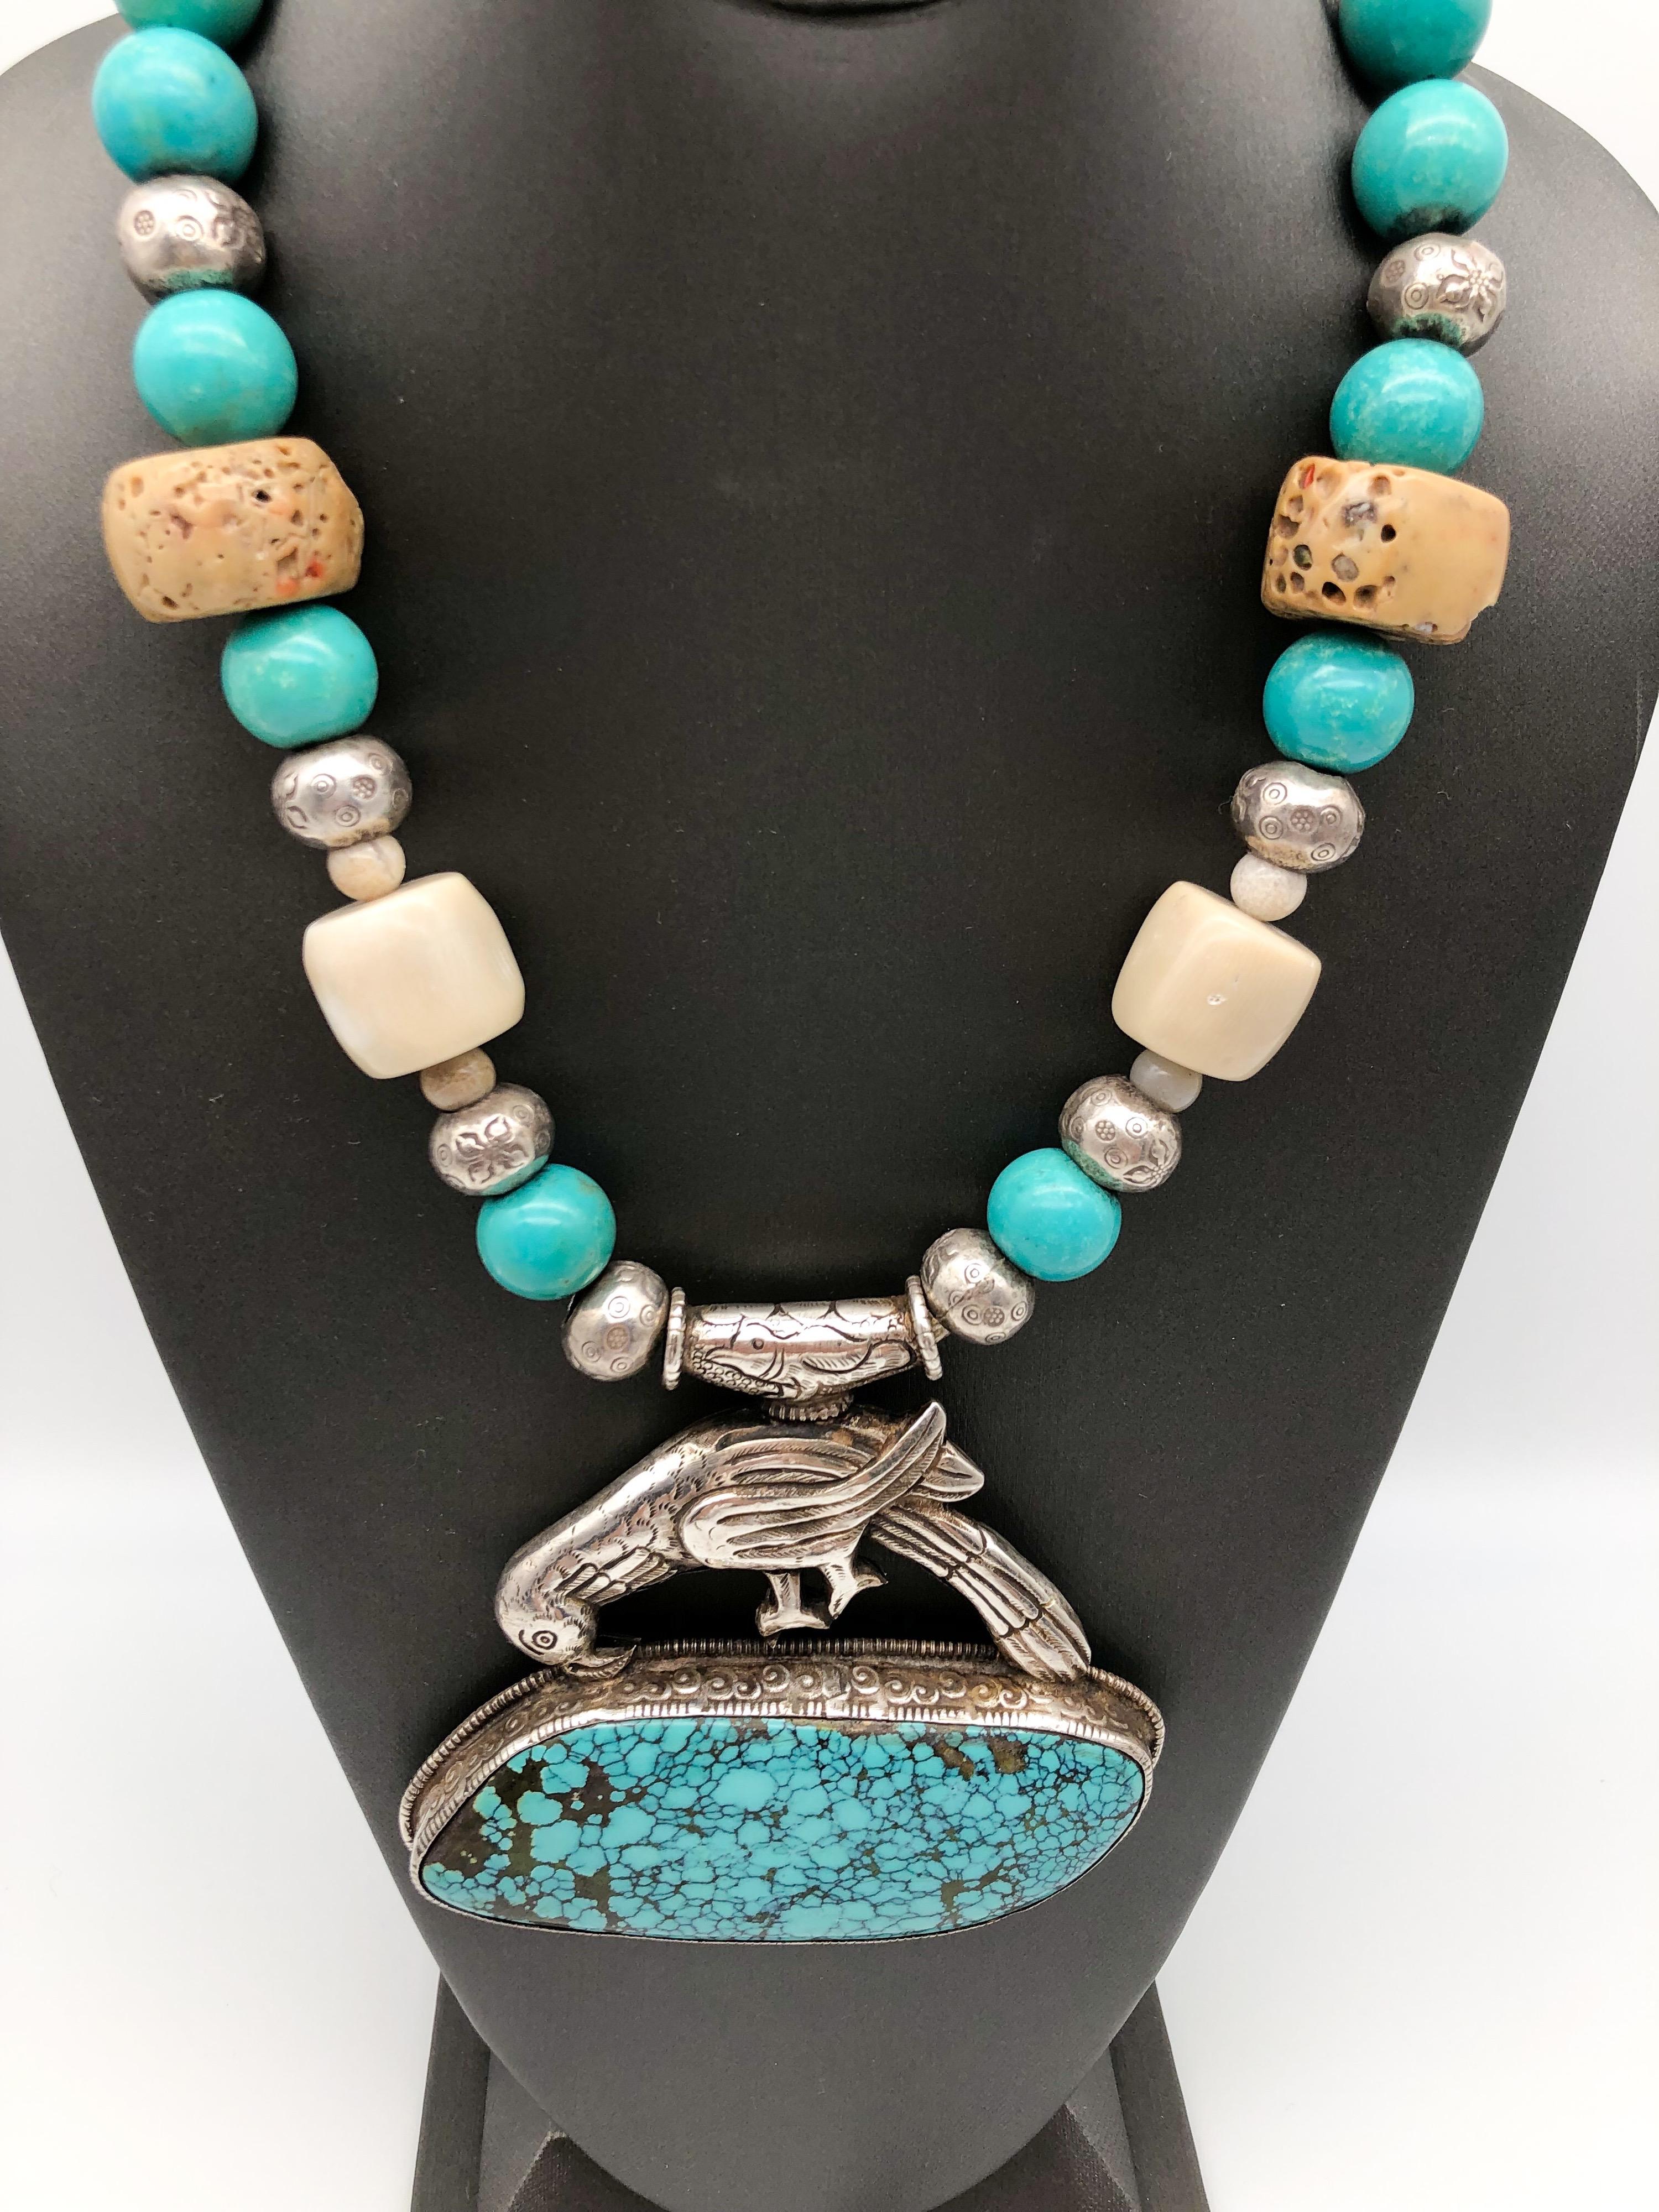 A.Jeschel Turquoise and Ethnic beads necklace with Tibetan Silver Bird Pendant   For Sale 7